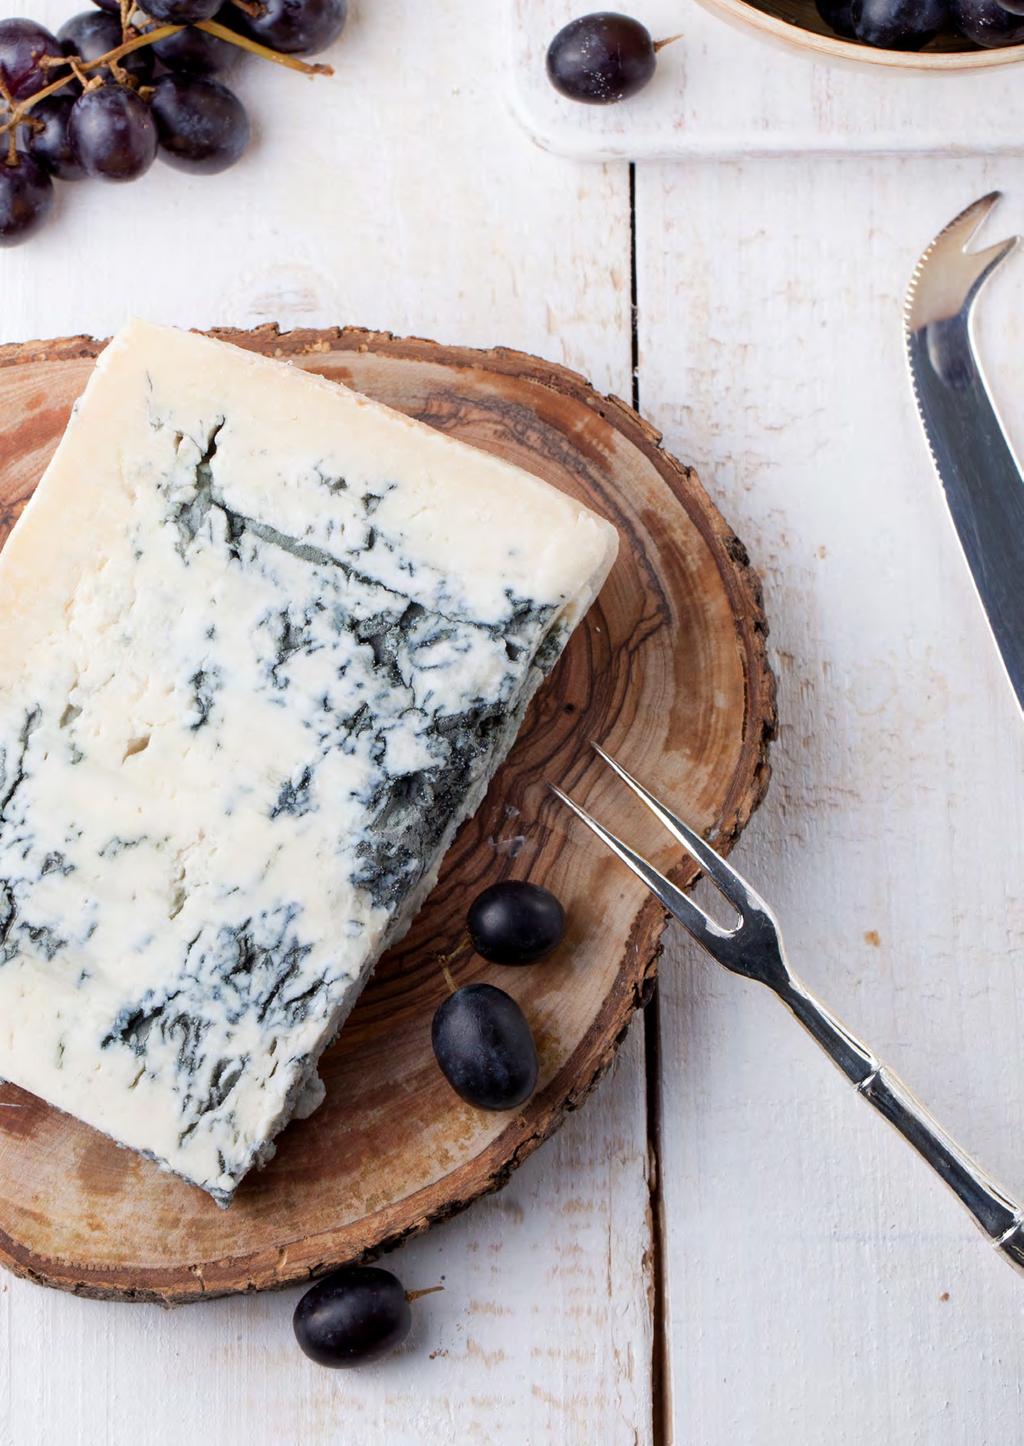 THE PAIRING GUIDE HAS BEEN CREATED MY RENOWNED CHEESE EXTRAORDINAIRE Sonia Cousins CHEESE ACTIVIST CHEESE JUDGE CHEESE EDUCATOR Sonia Cousins has been a professional cheese eater for more than 12